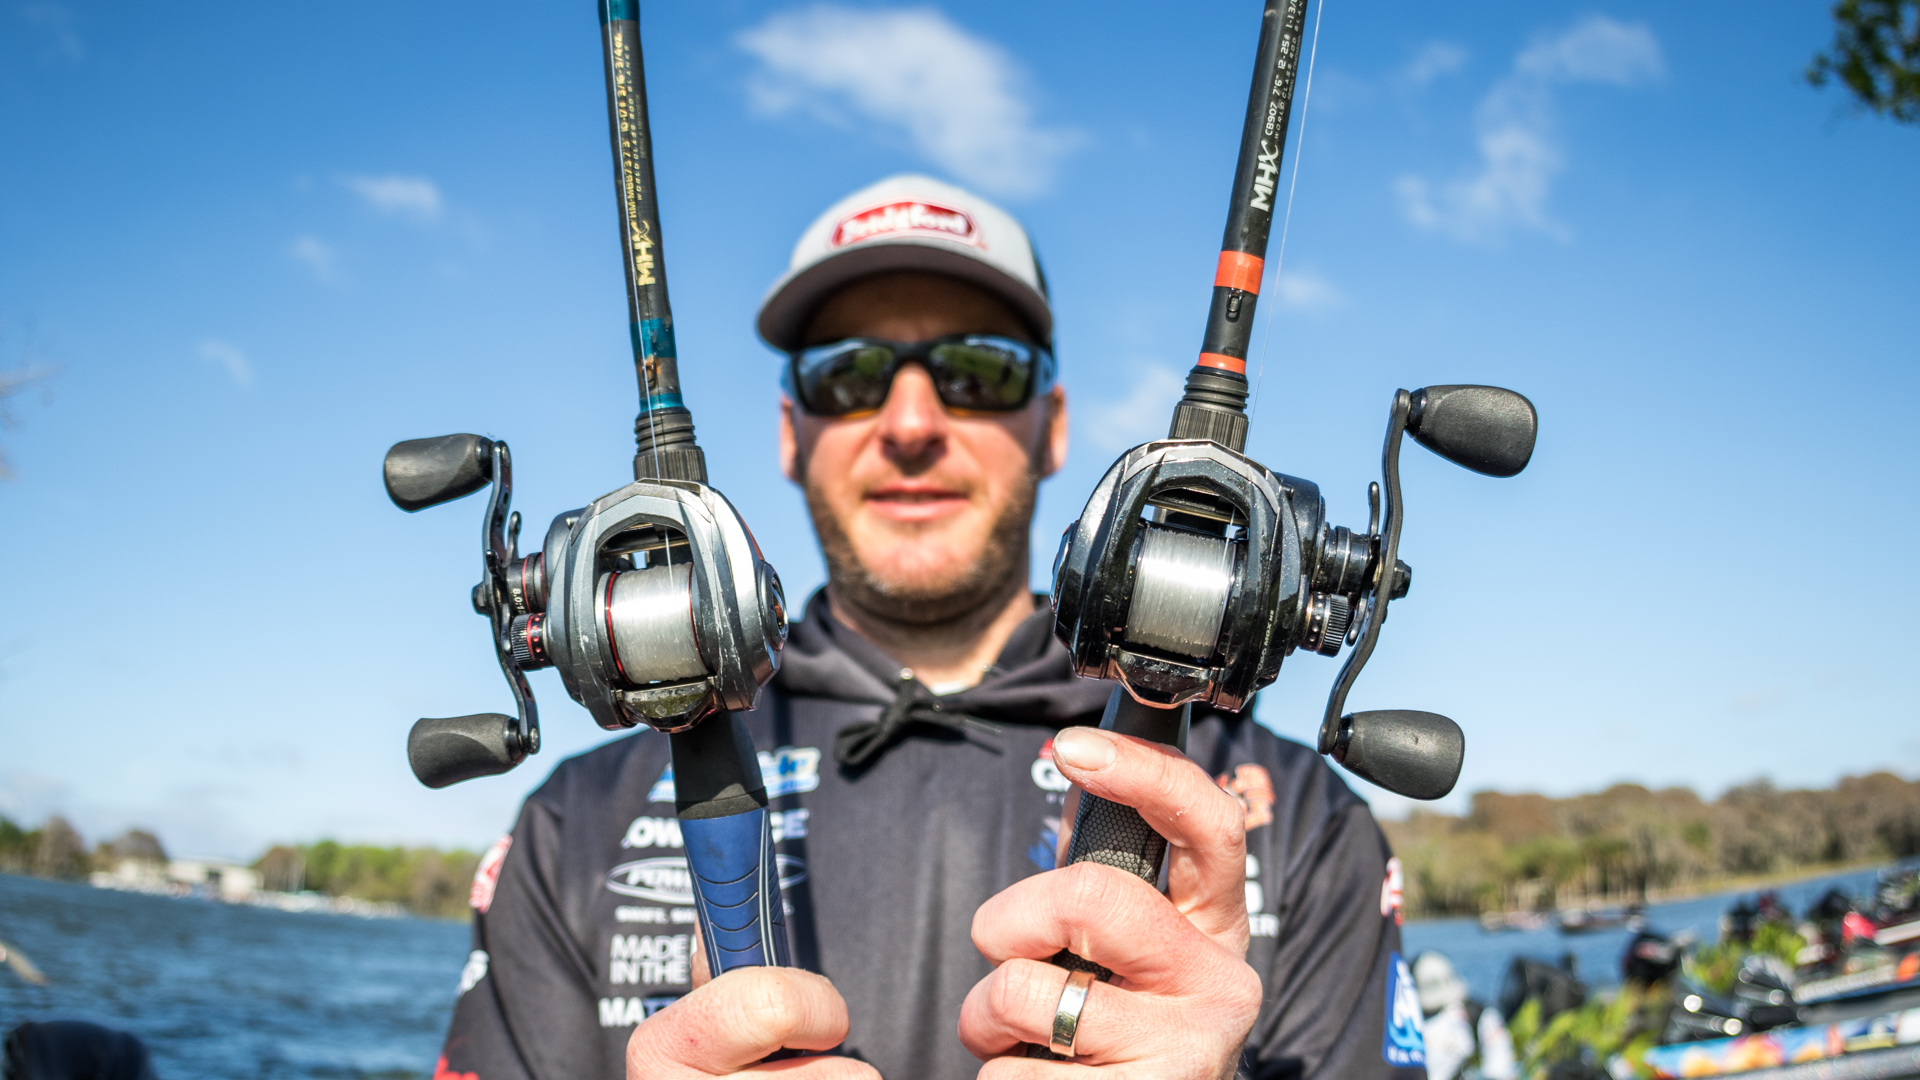 Benefits of fishing reel power knob modification and upgrade